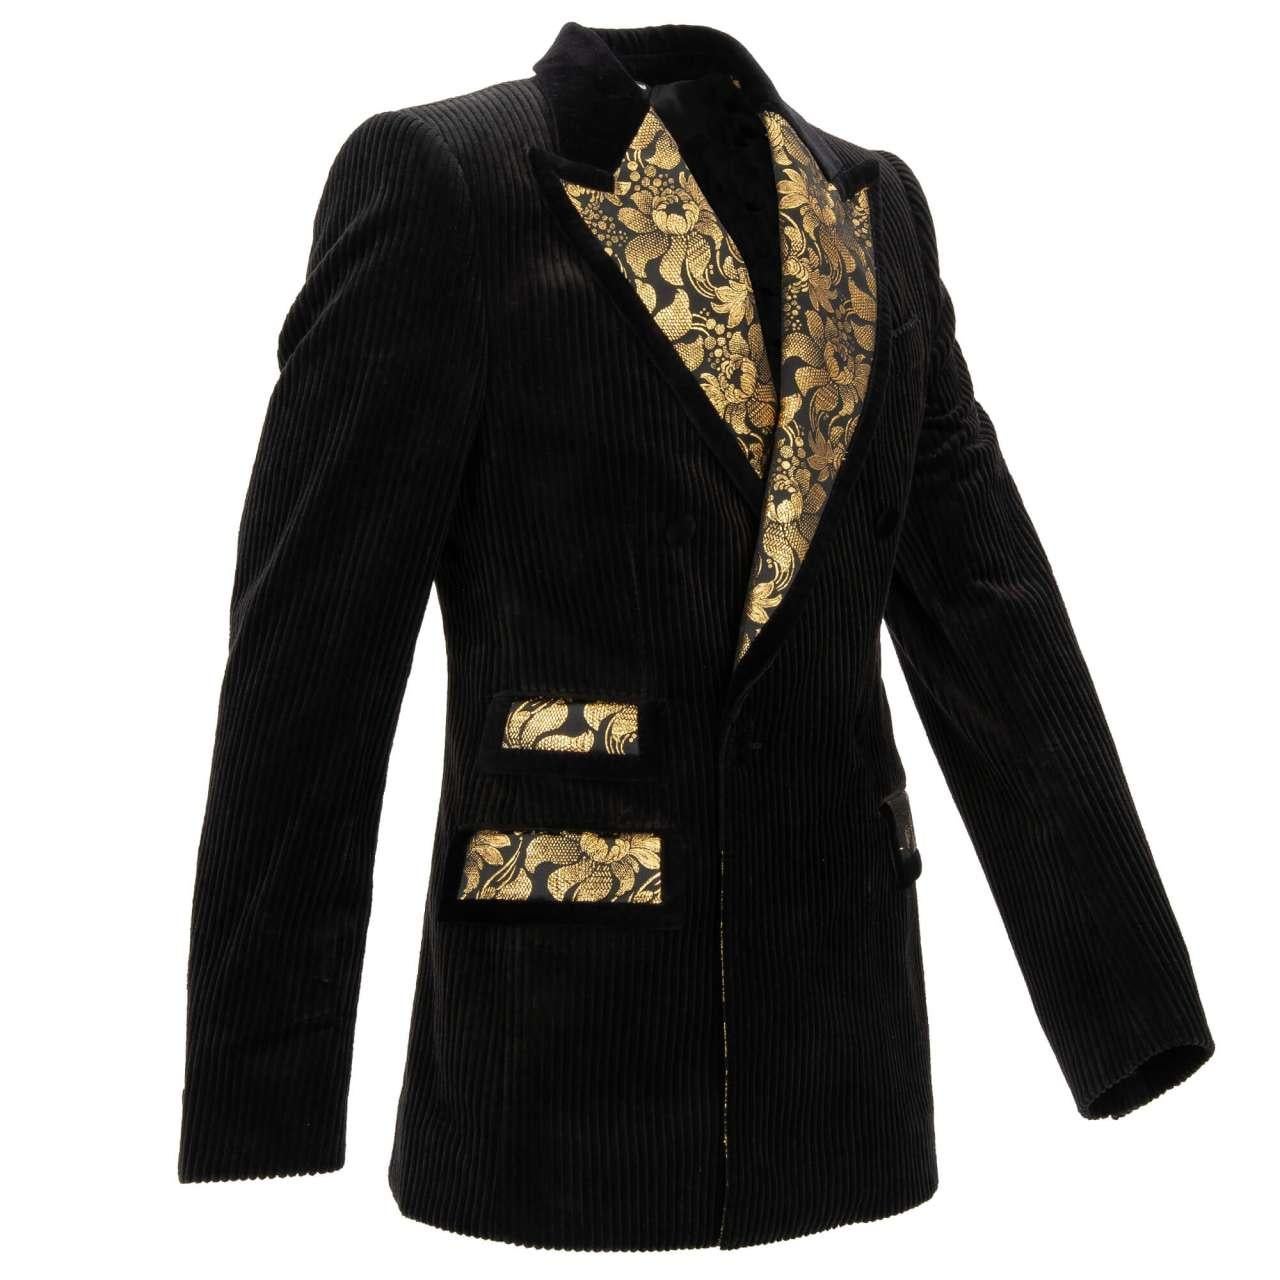 - Double-Breasted floral pattern jacquard and corduloy blazer in gold and black by DOLCE & GABBANA - RUNWAY - Dolce&Gabbana Fashion Show - Made In Italy - New with Tag - Slim Fit - Model: G2NR0T-FUVFE-N0000 - Material: 78% Cotton, 20% Silk, 2%